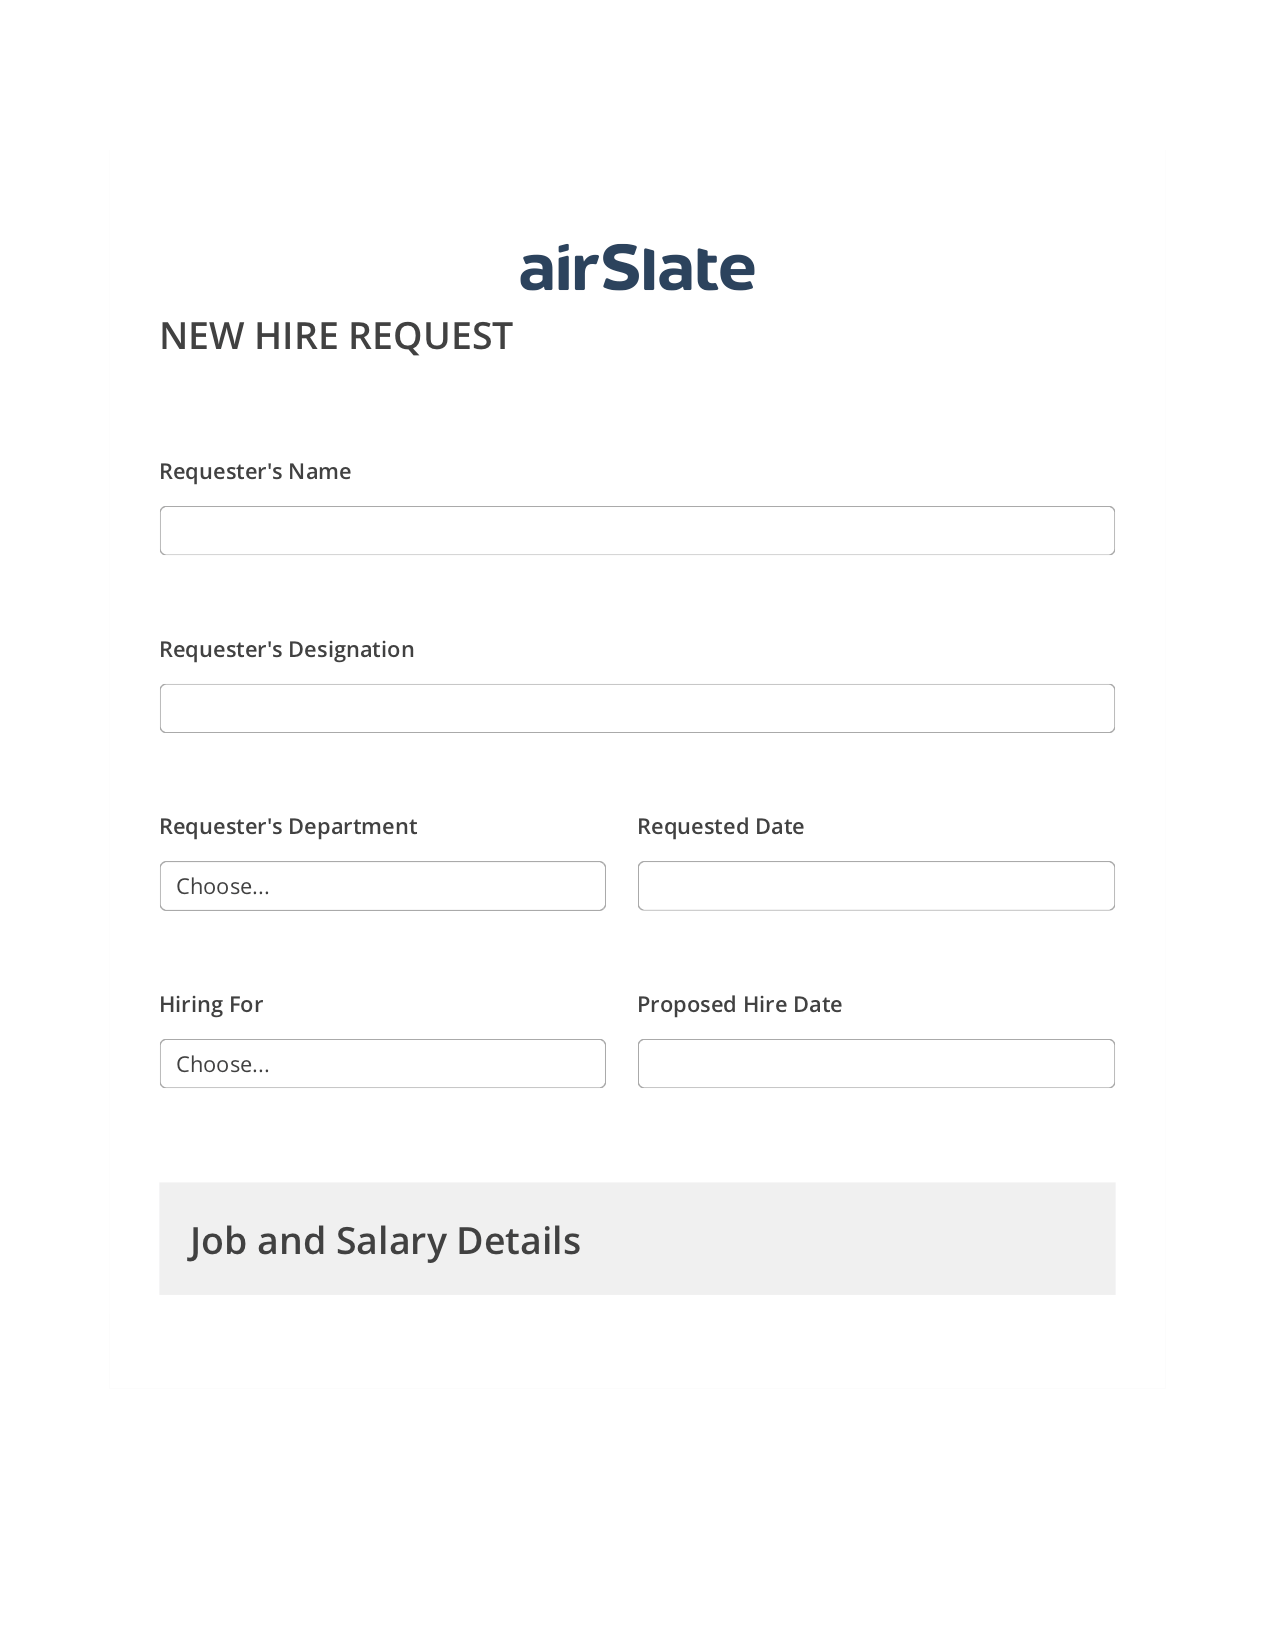 Multirole Hiring Request Workflow Pre-fill Document Bot, Add Tags to Slate Bot, Archive to Google Drive Bot